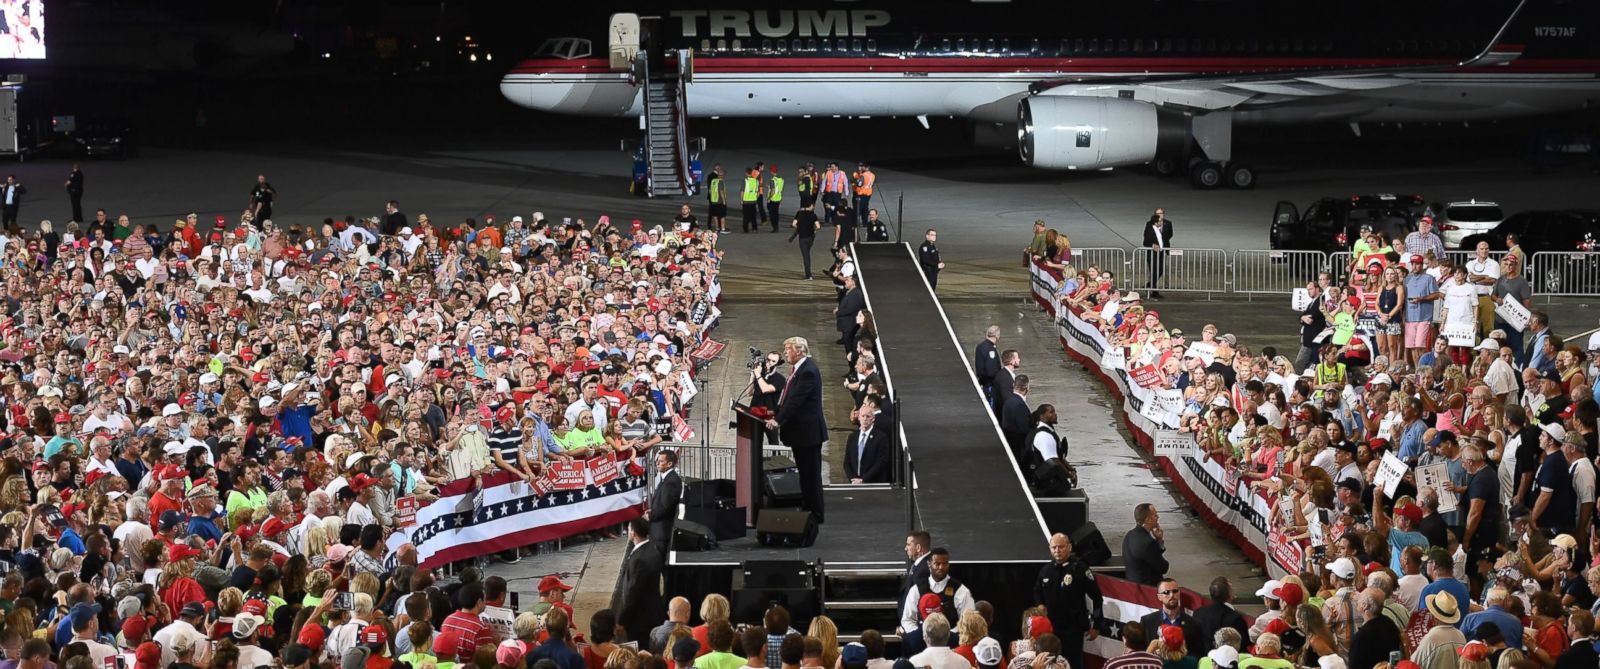 Trump set to hold campaign rally in Florida today